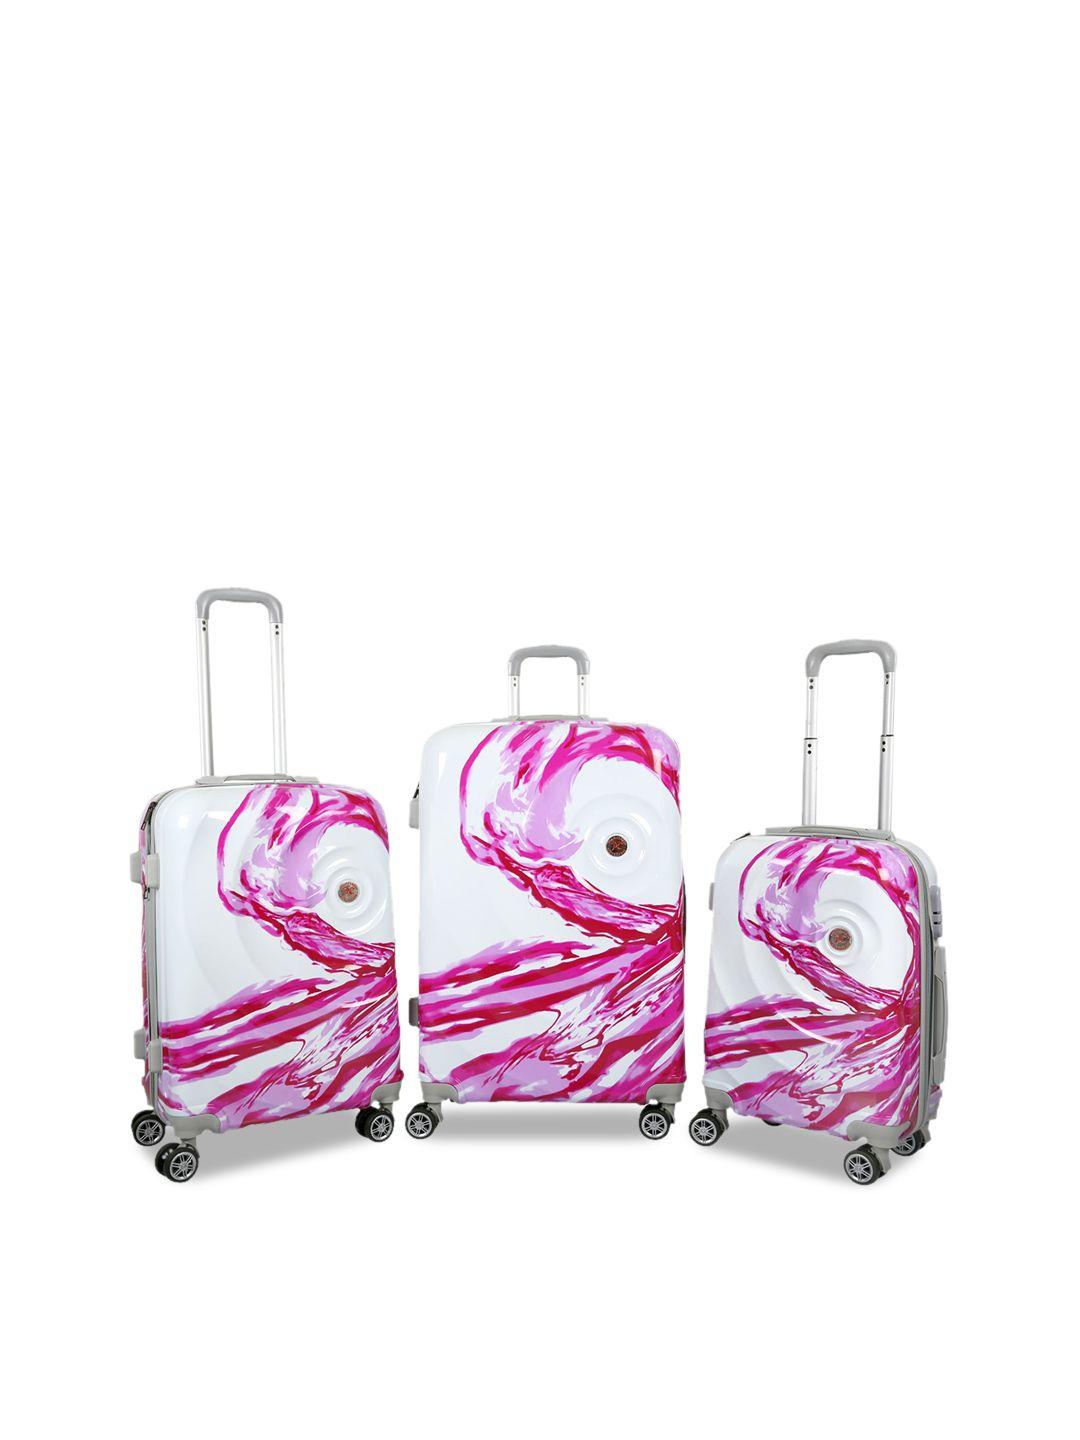 polo class unisex 3 pcs white & pink hard luggage trolley bags